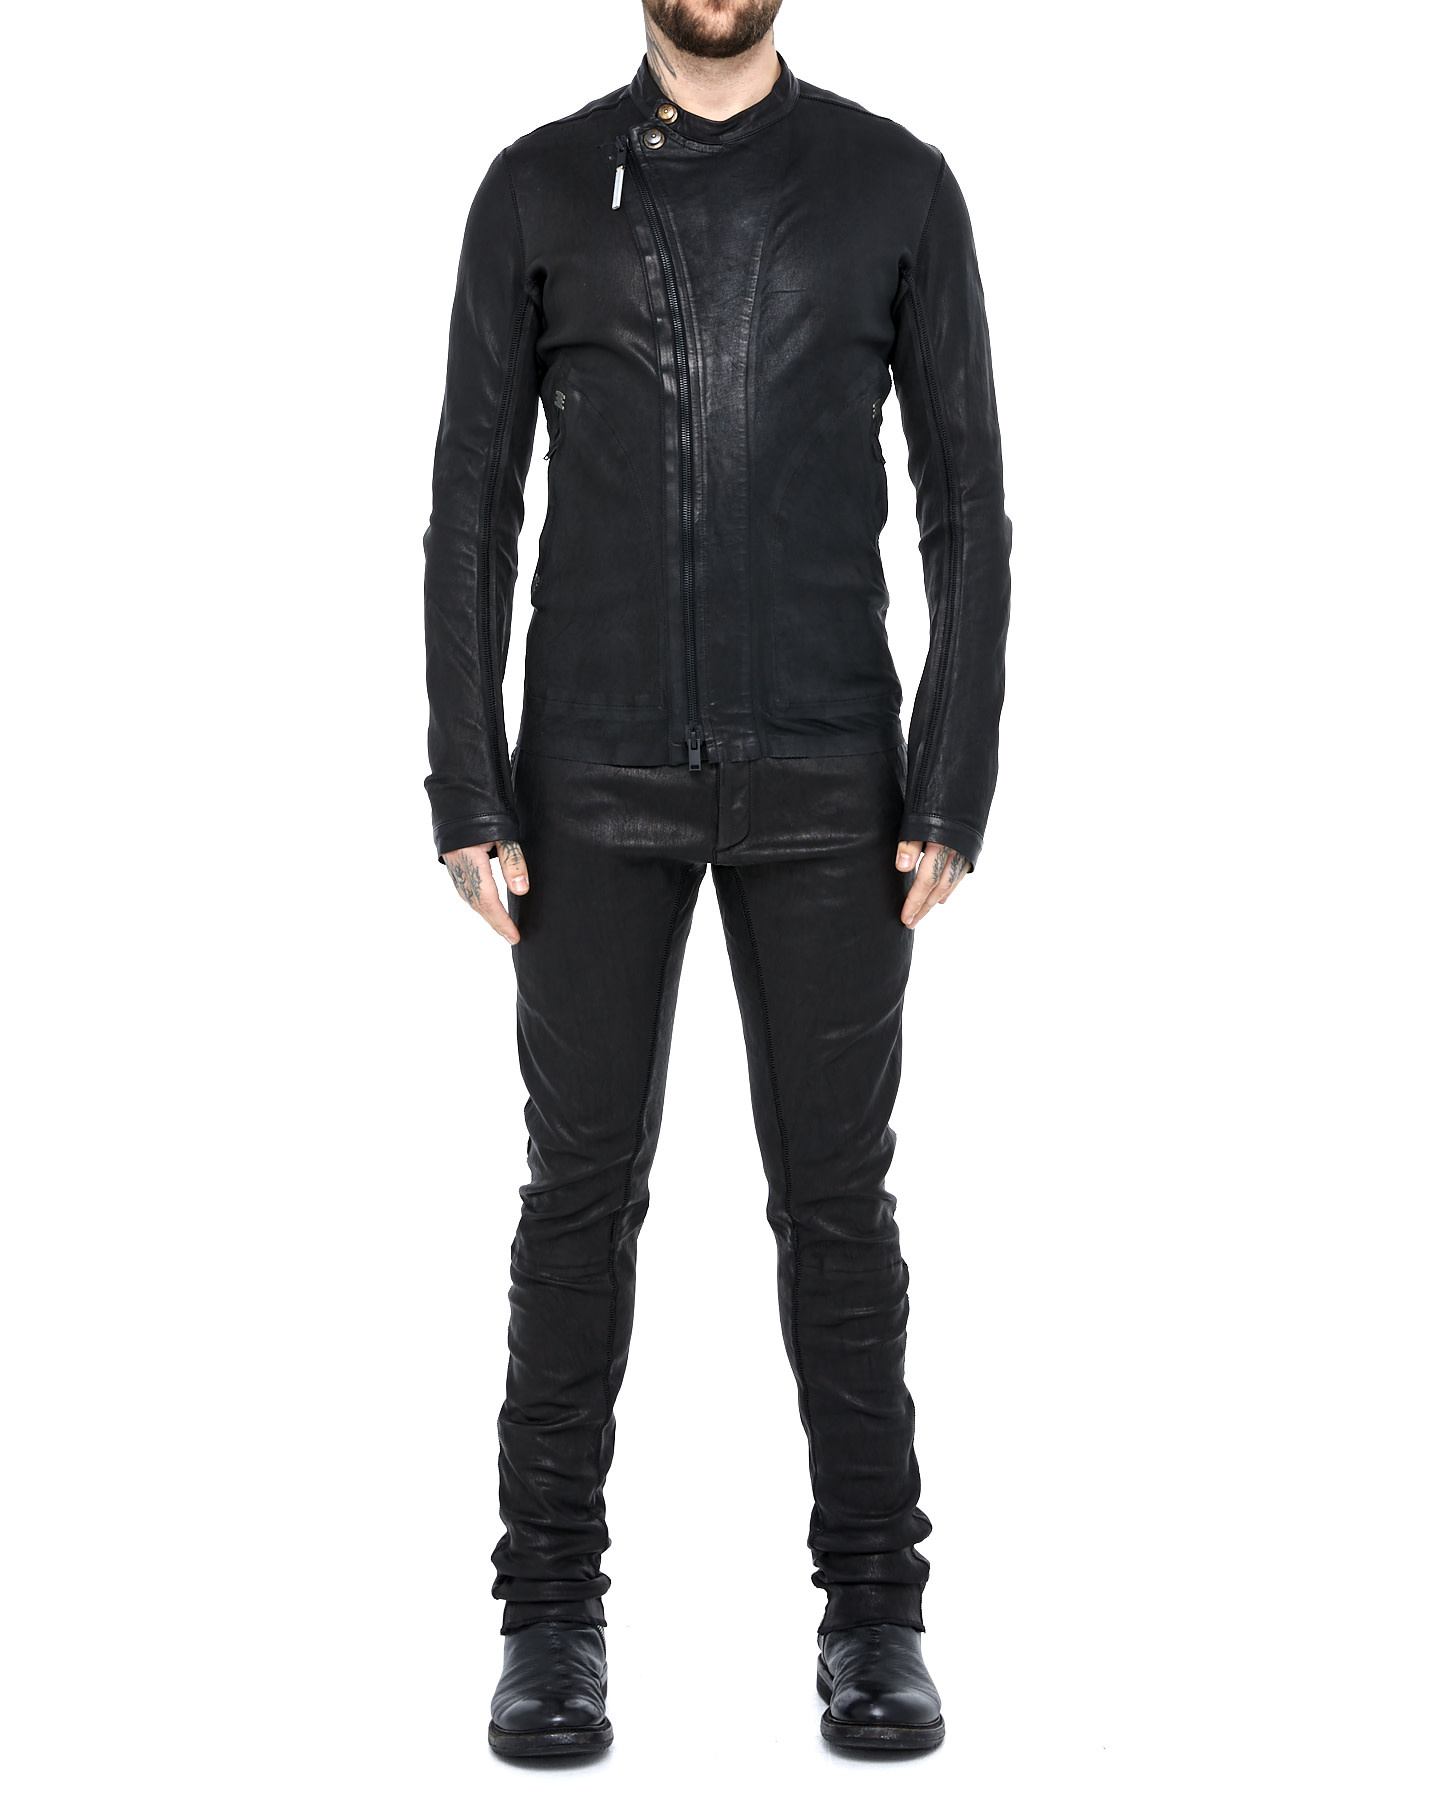 Leather Untitled | NYC Shop Bute Neo - by Untitled Sellam Stretch Shop Isaac NYC Jacket